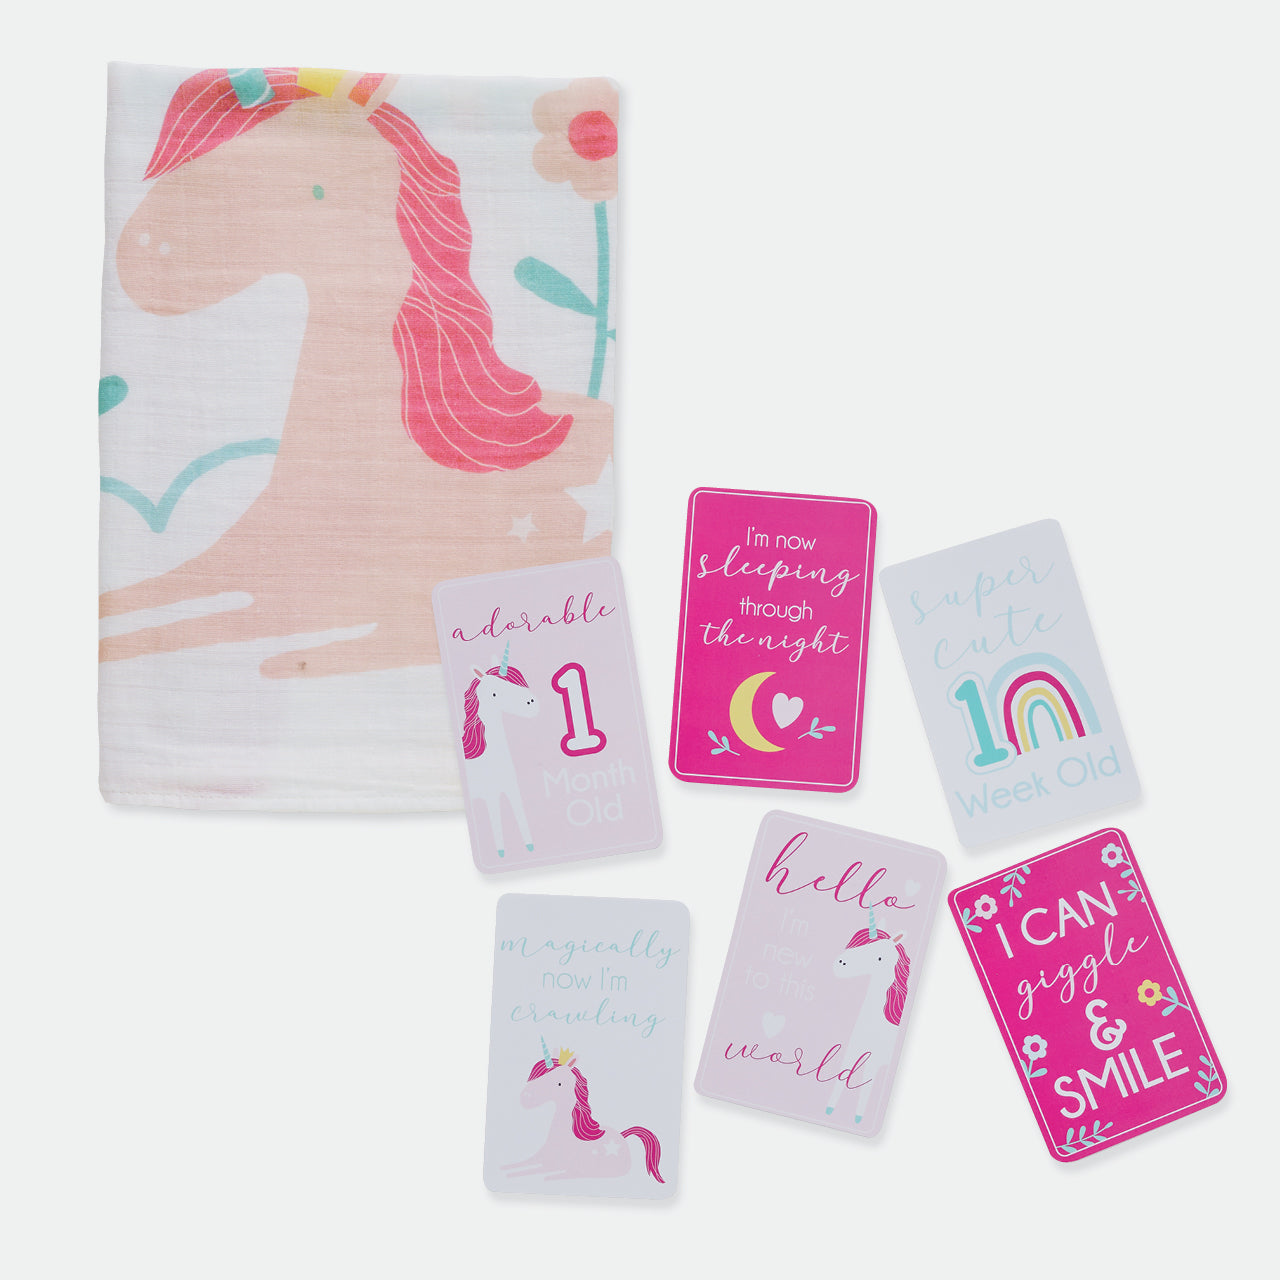 Utopia Muslin Blanket and Milestone Cards on white background